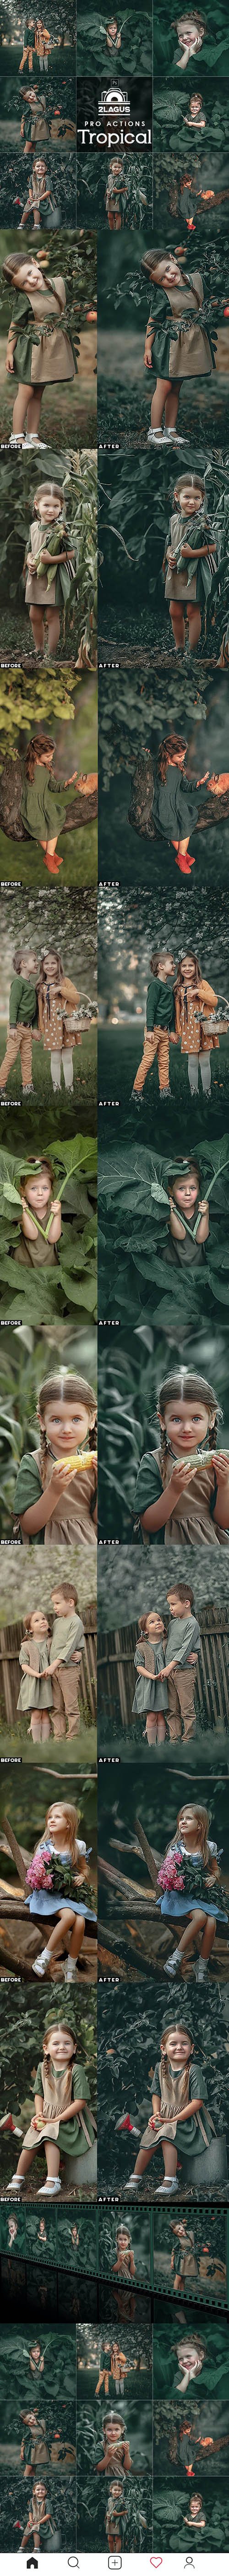 GraphicRiver - Tropical Photoshop Actions 27184823